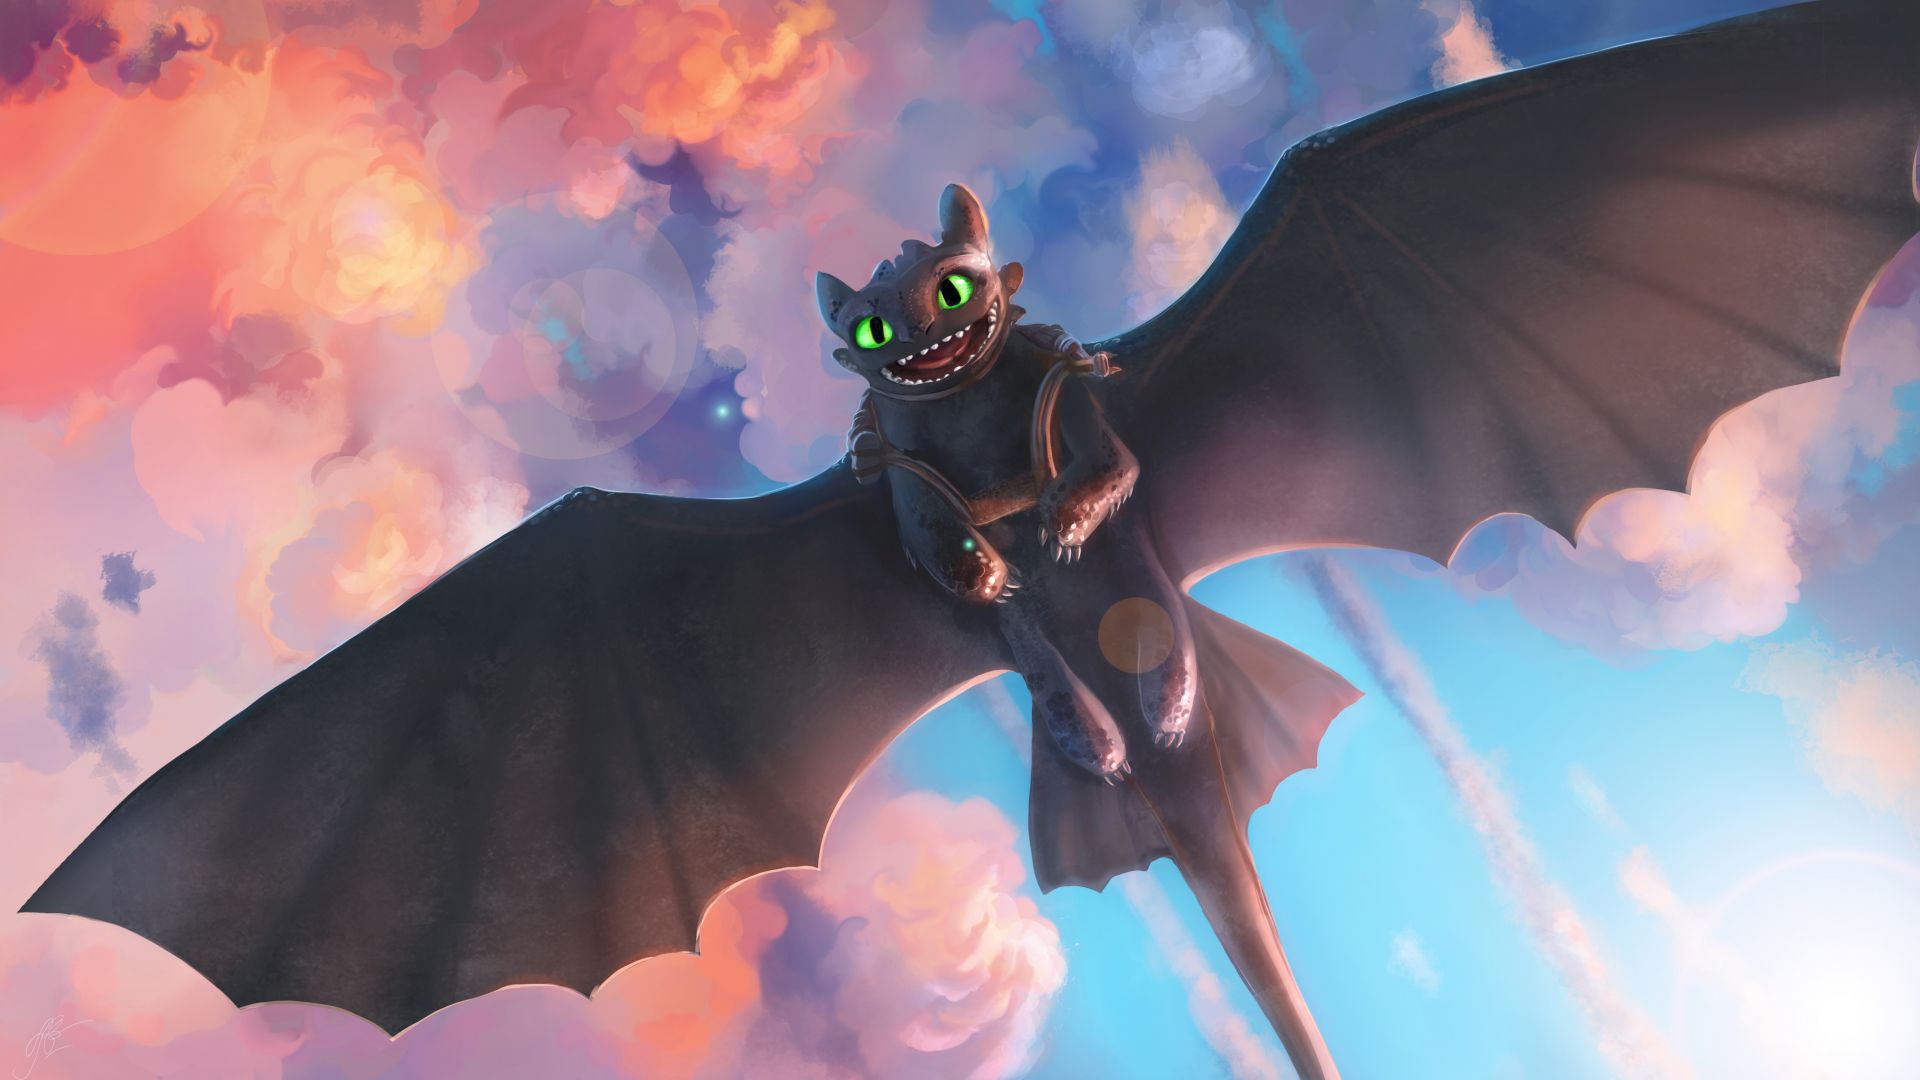 Desktop wallpaper movie, toothless, night fury, dragon, how to train your dragon, HD image, picture, background, 66a38c